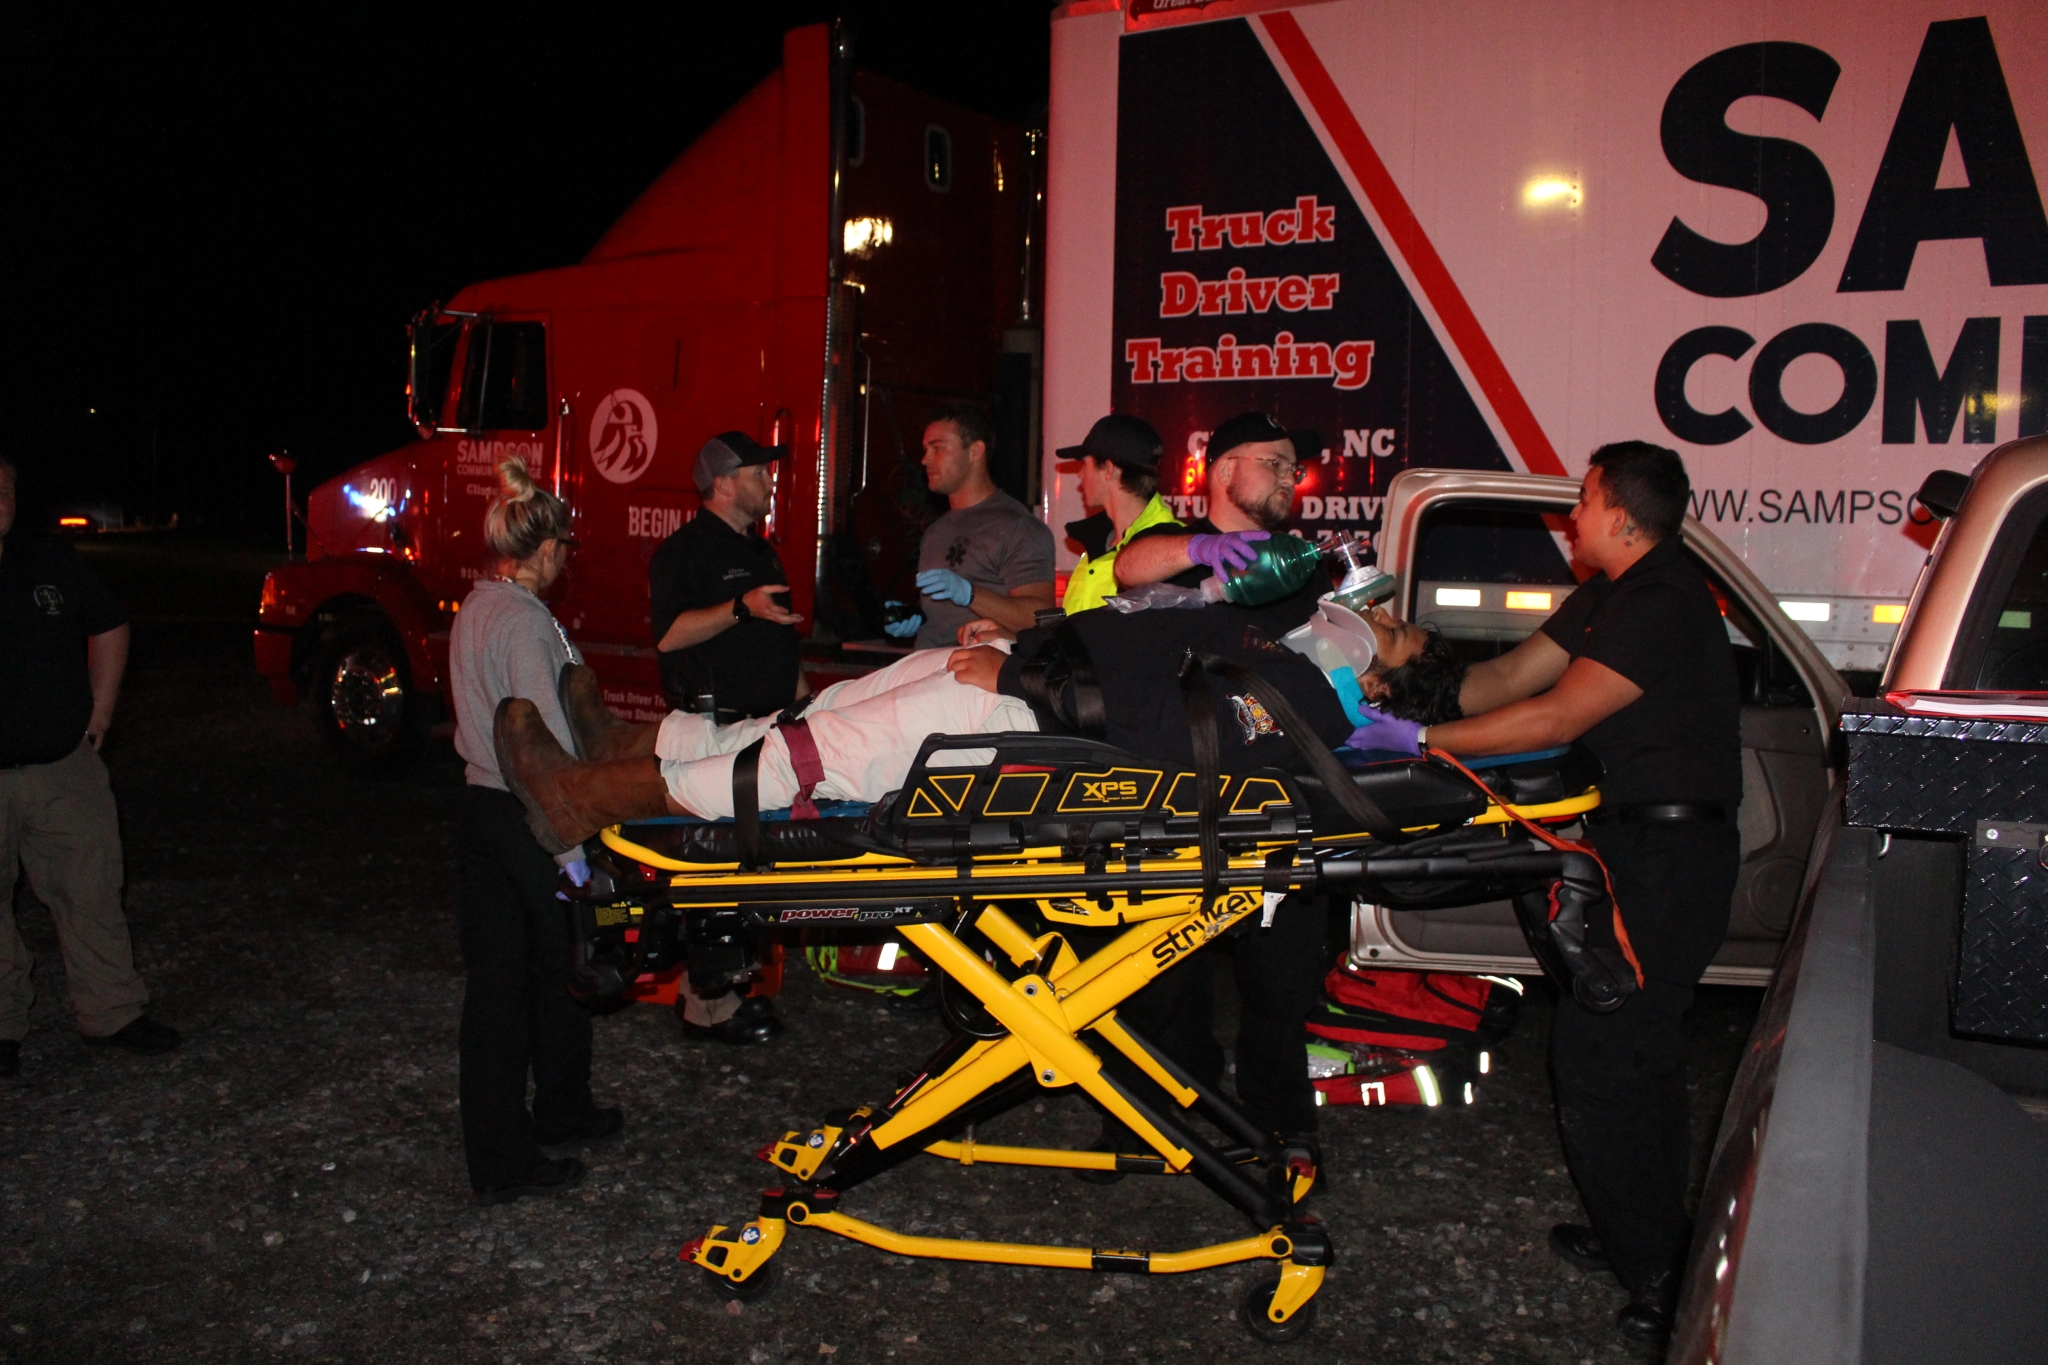 SCC EMS Program Hosts Training Exercise for Graduates with Assistance from Regional Partners